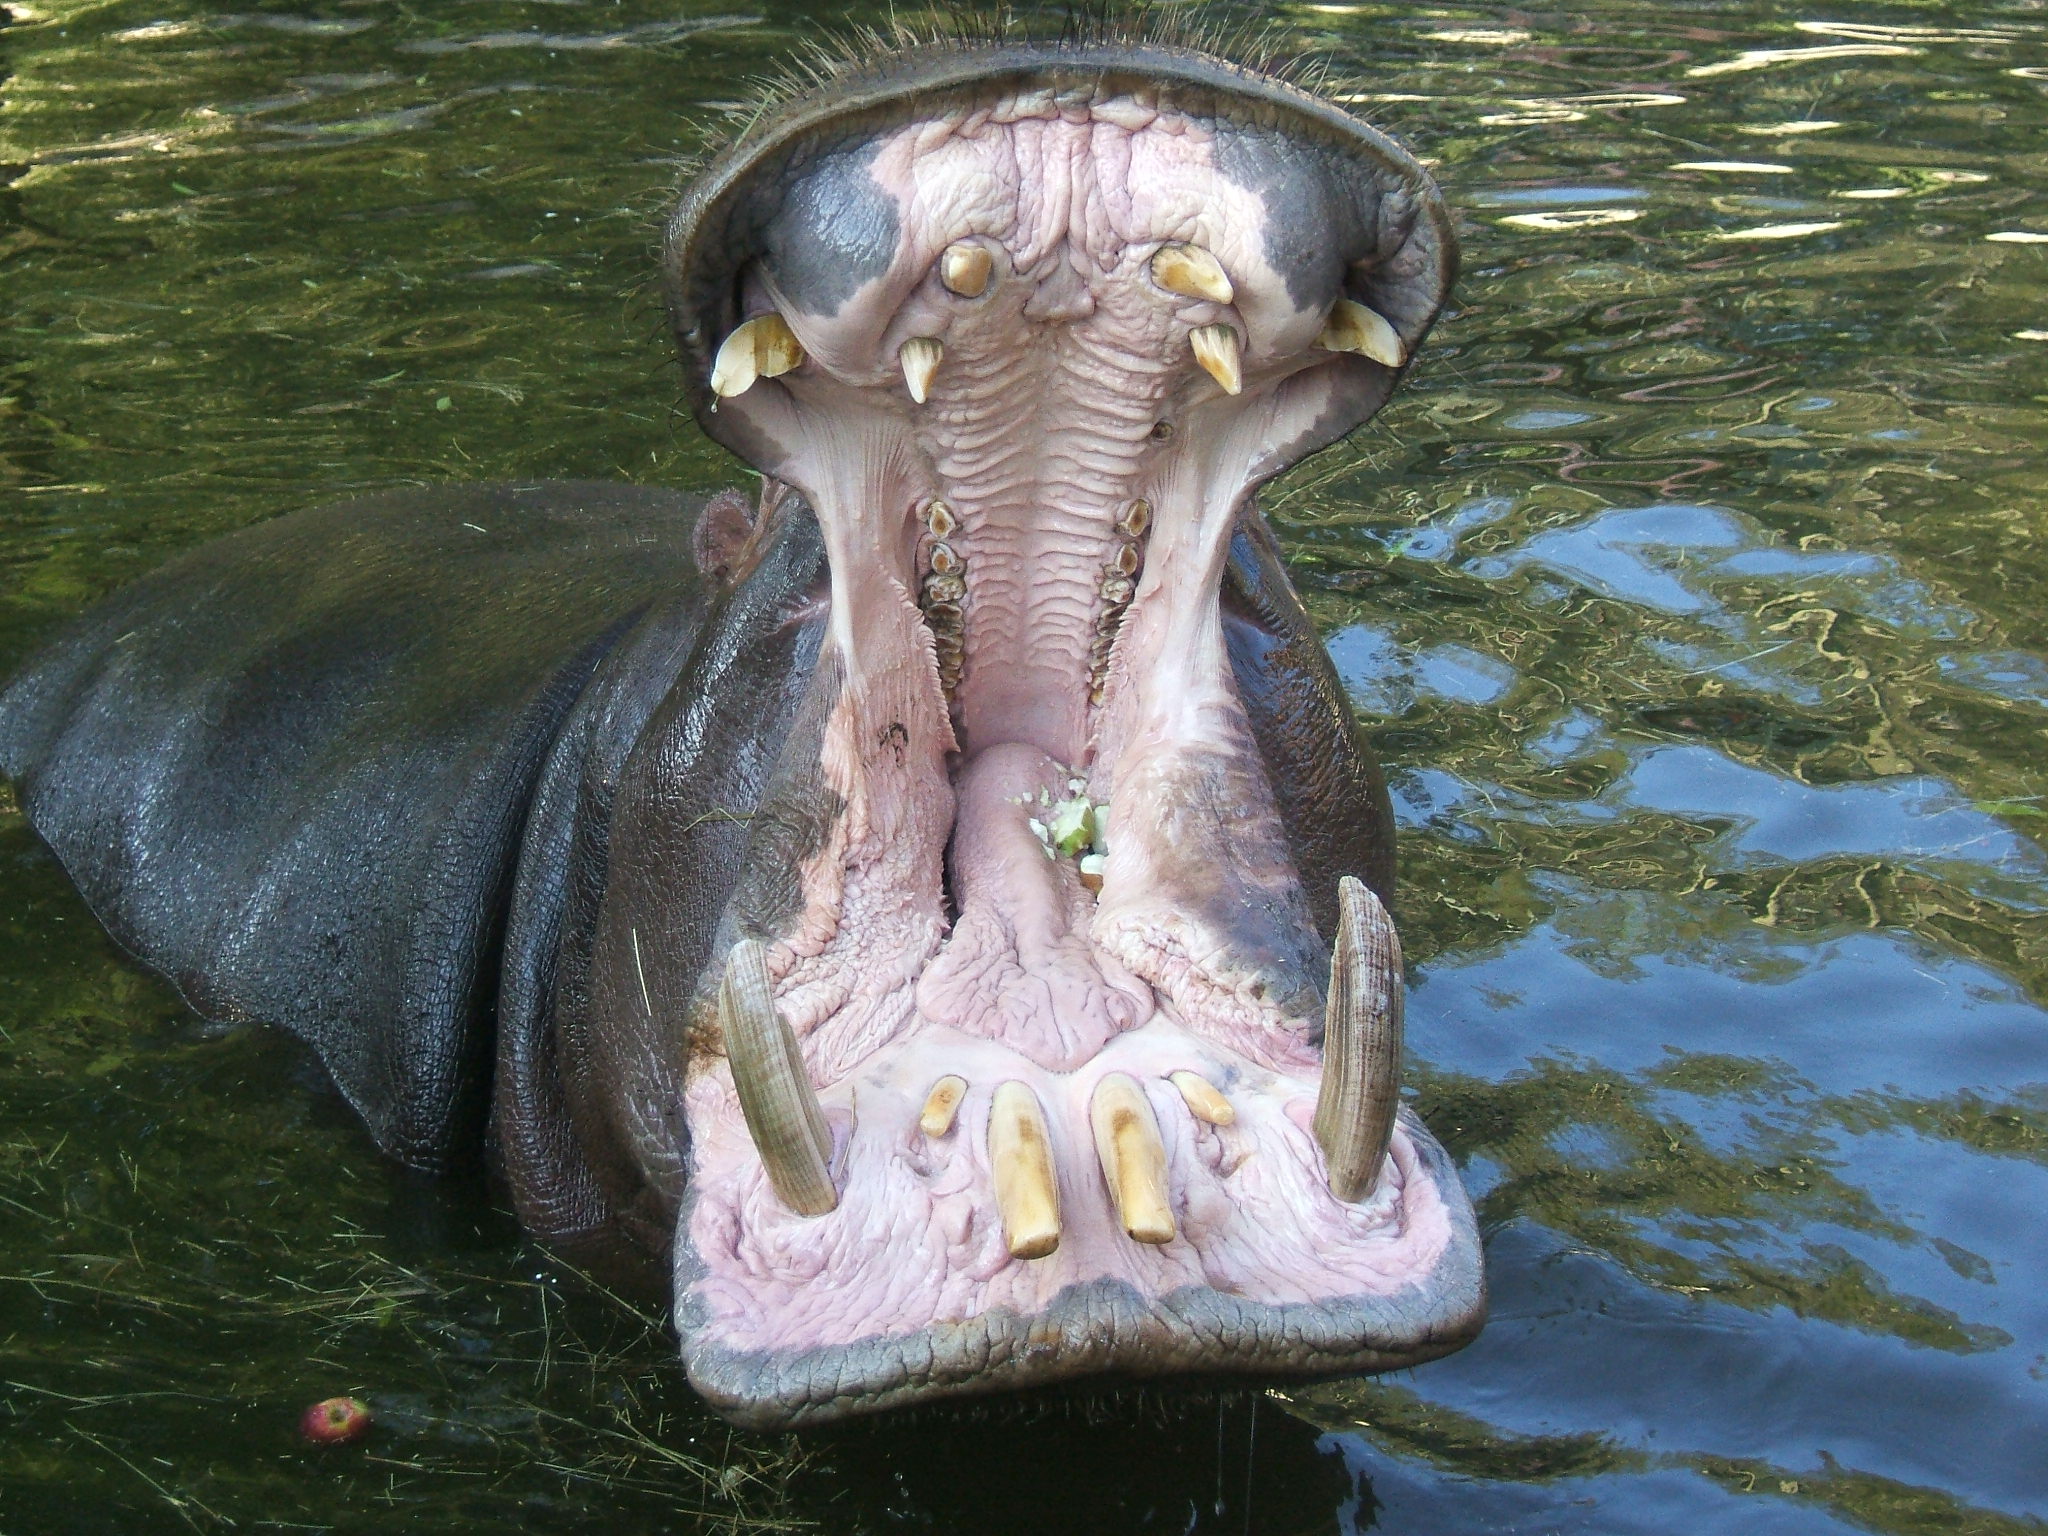 File:Hippo mouth.jpg - Wikimedia Commons